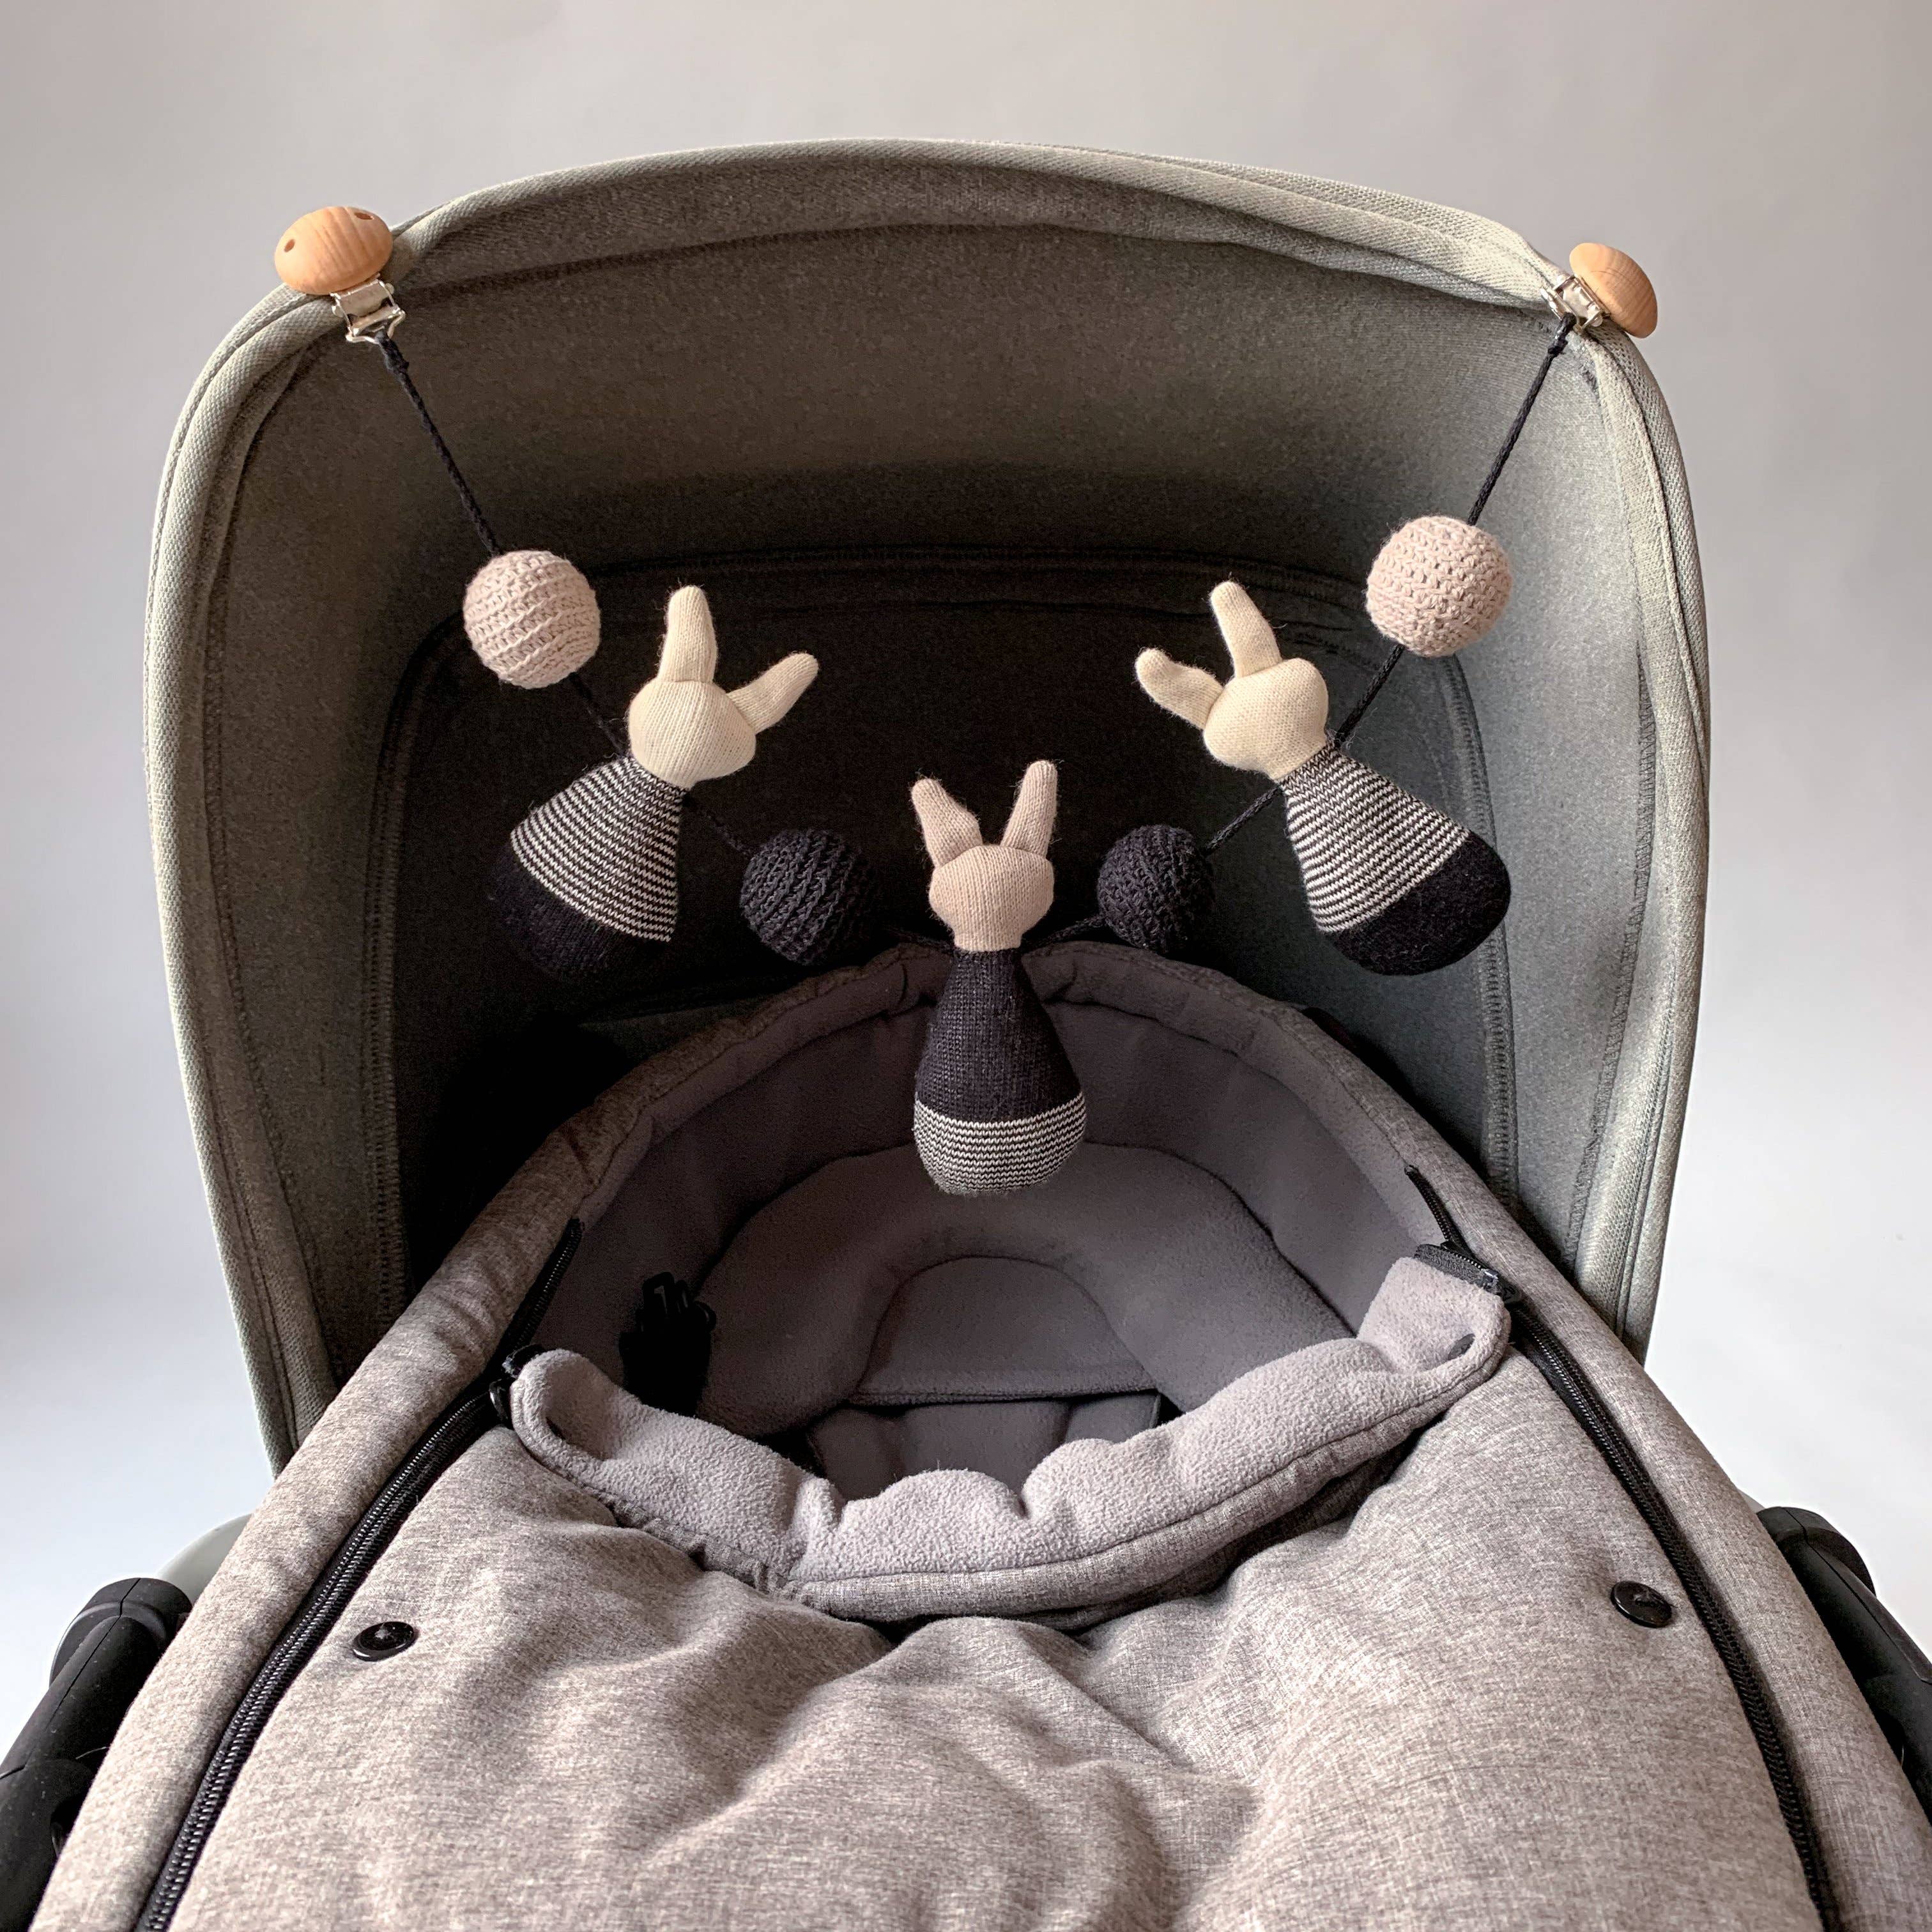 Stroller Toy Chain - Rabbits